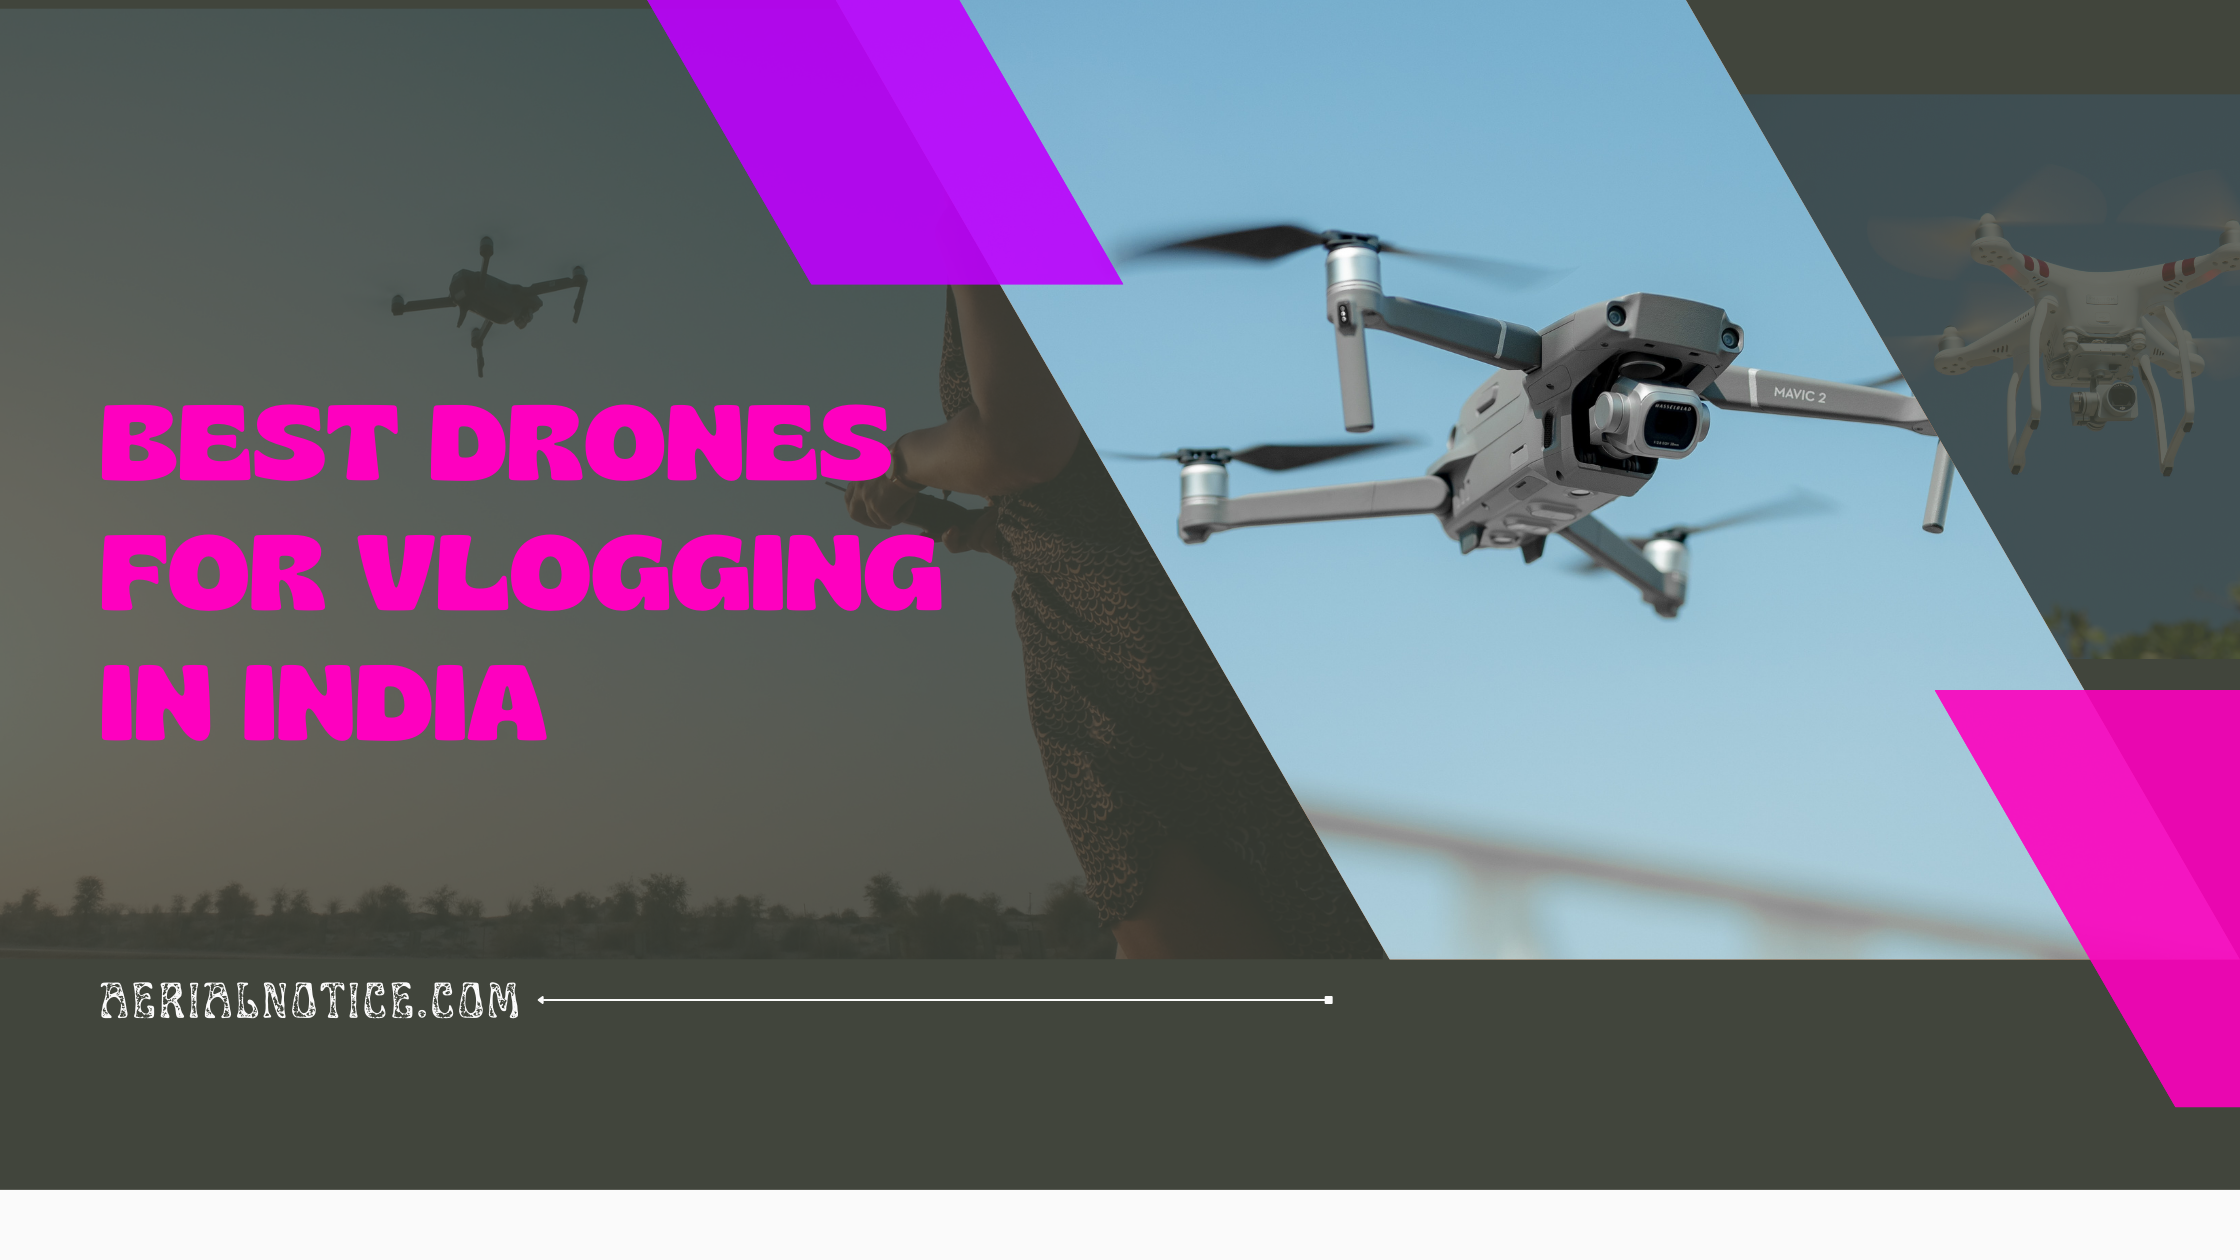 Drones for Vlogging in India